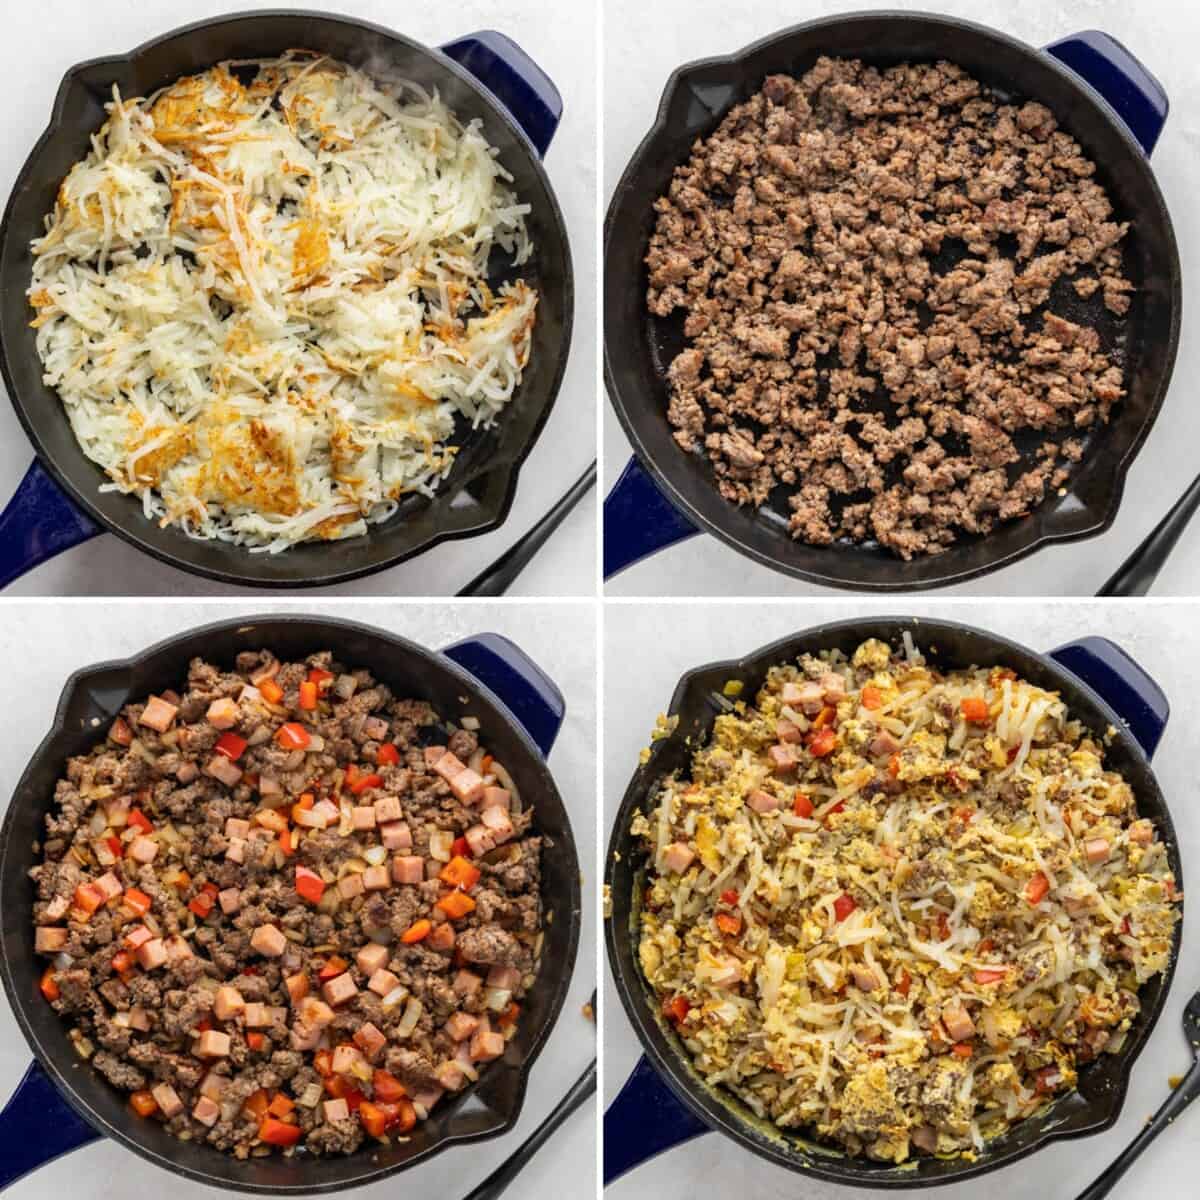 A collage of four images to show the process of how to make the breakfast burrito filling from start to finish.